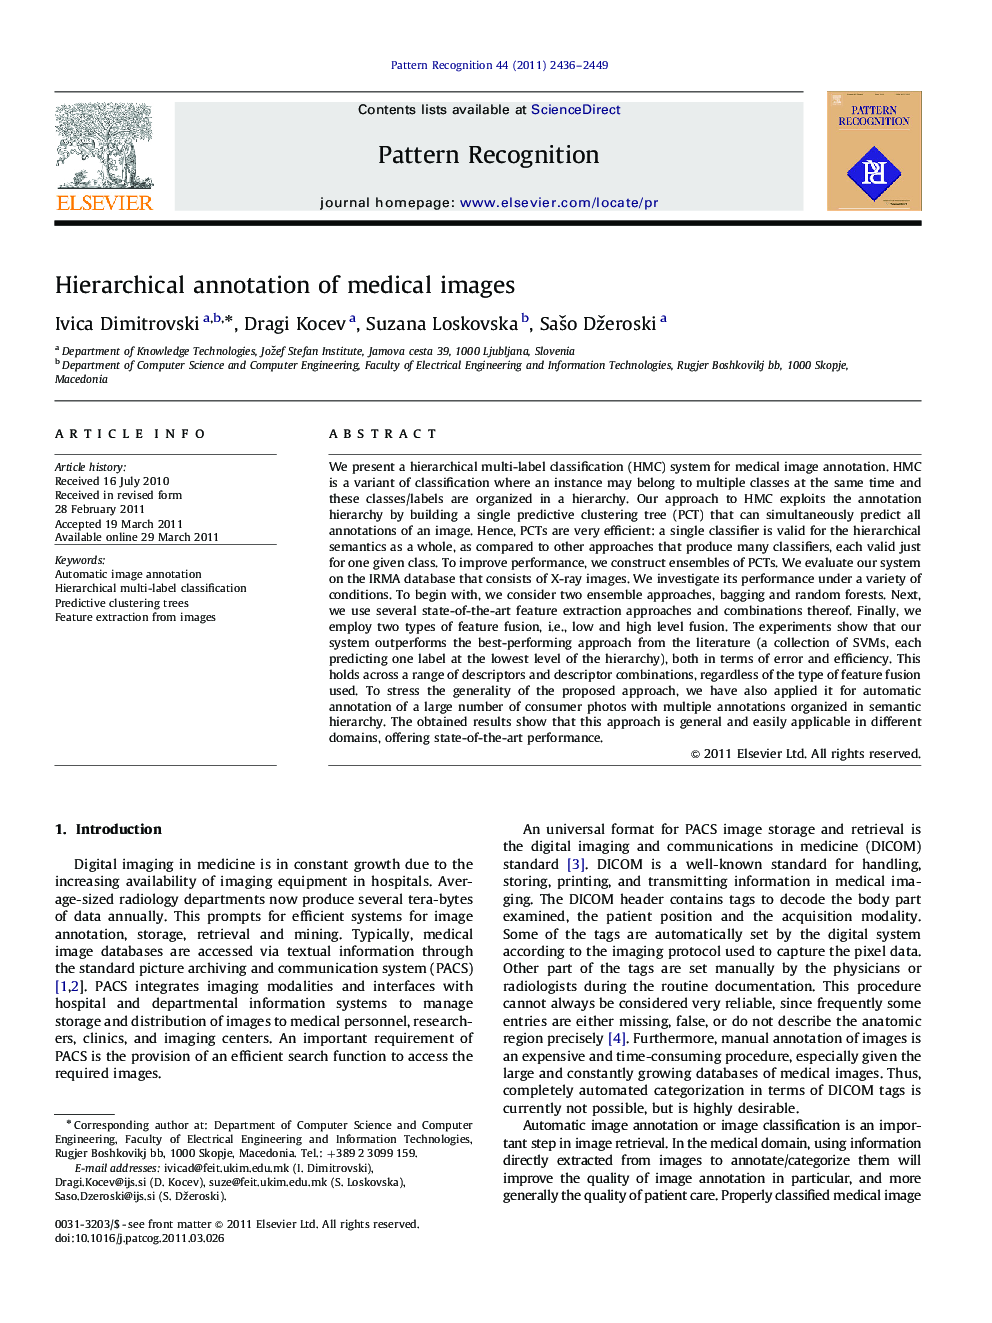 Hierarchical annotation of medical images